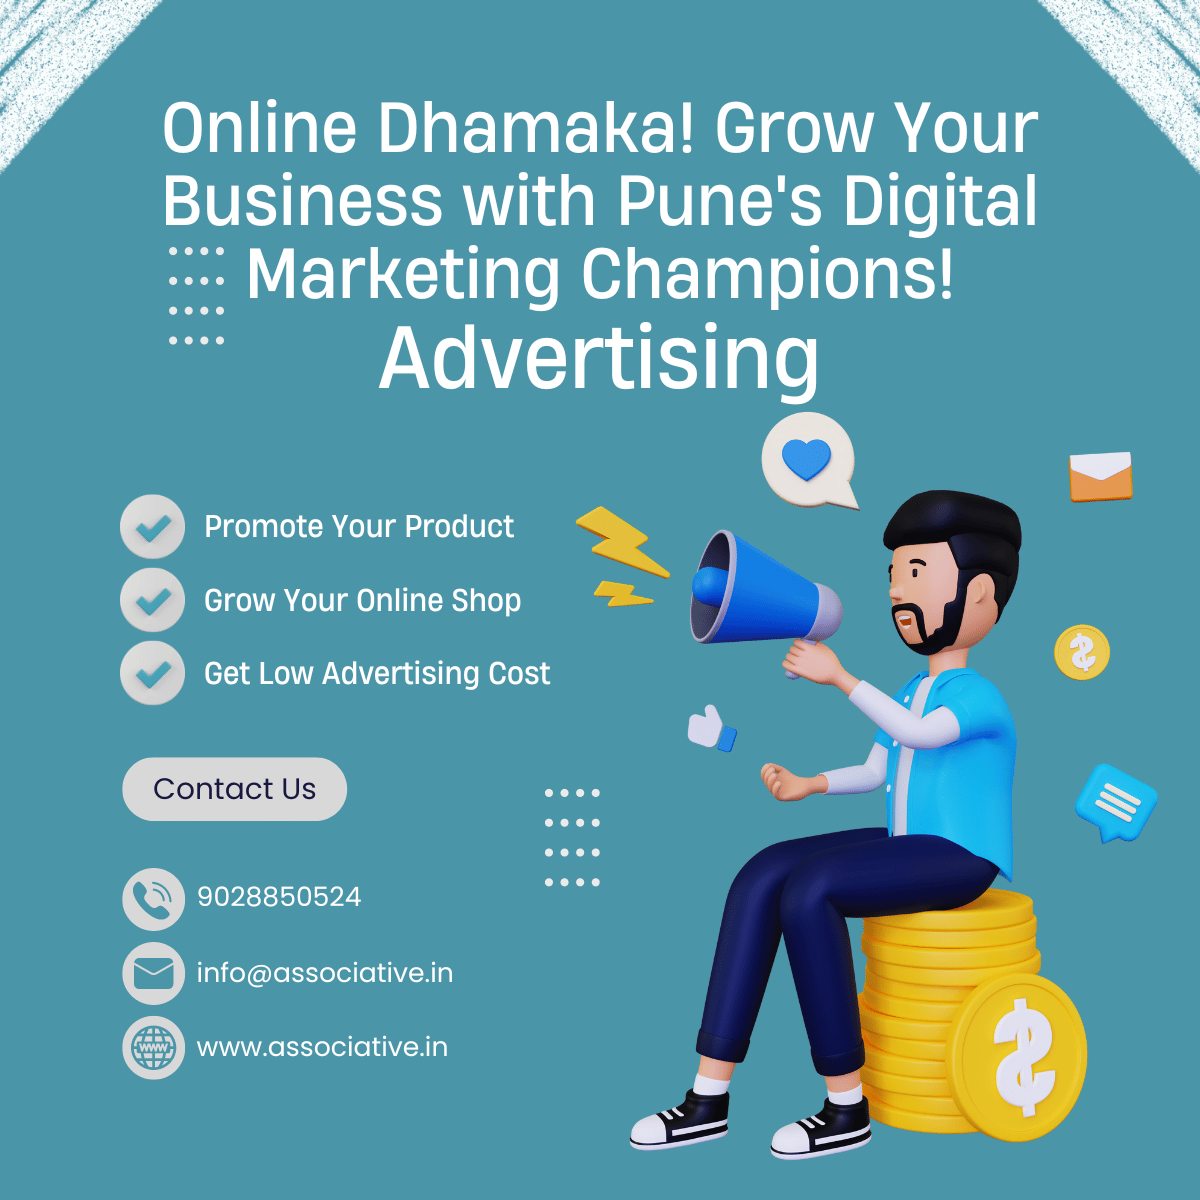 Online Dhamaka! Grow Your Business with Pune's Digital Marketing Champions!